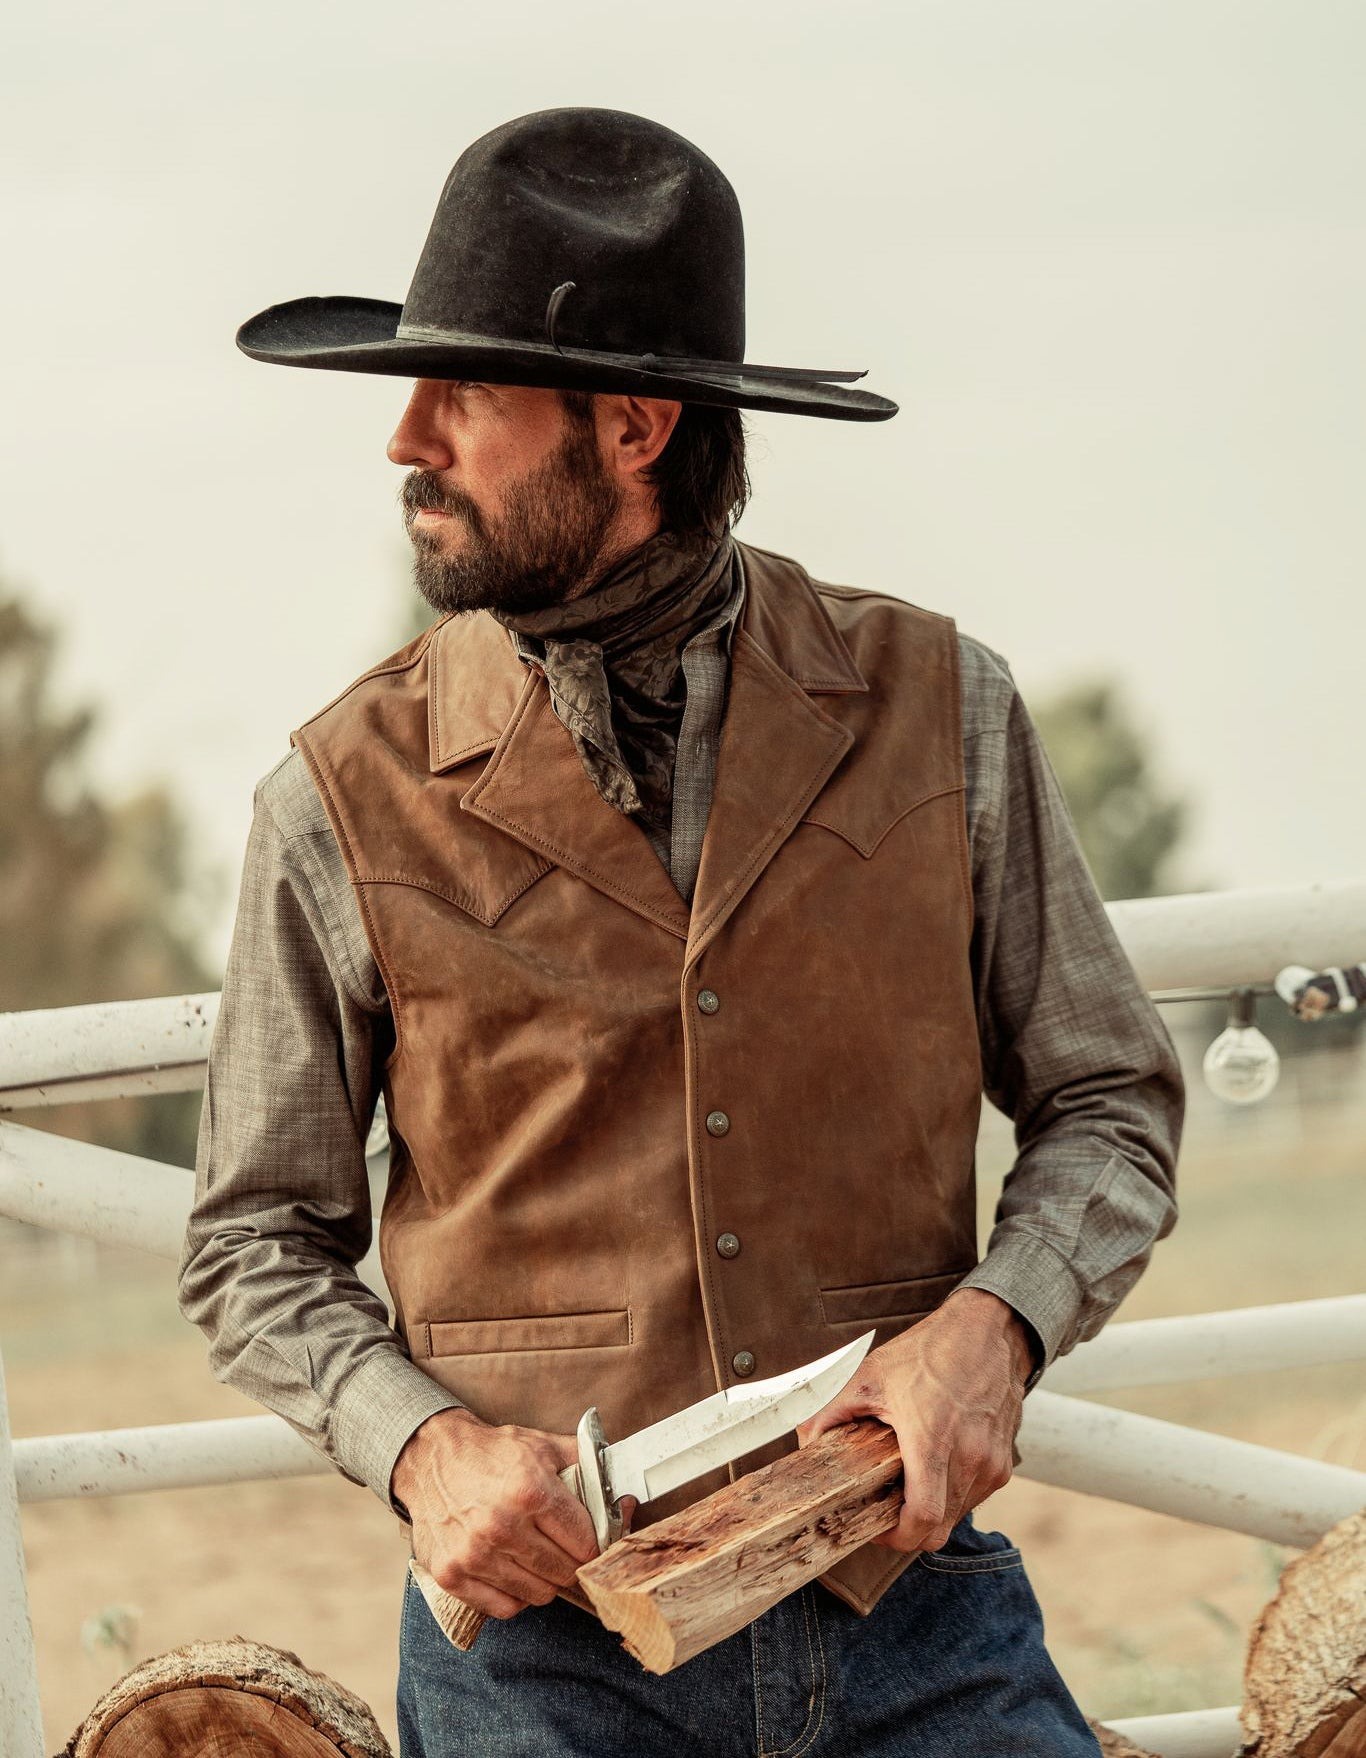 Wild West Inspired: The Cultural Significance of the Western Leather Biker Vest